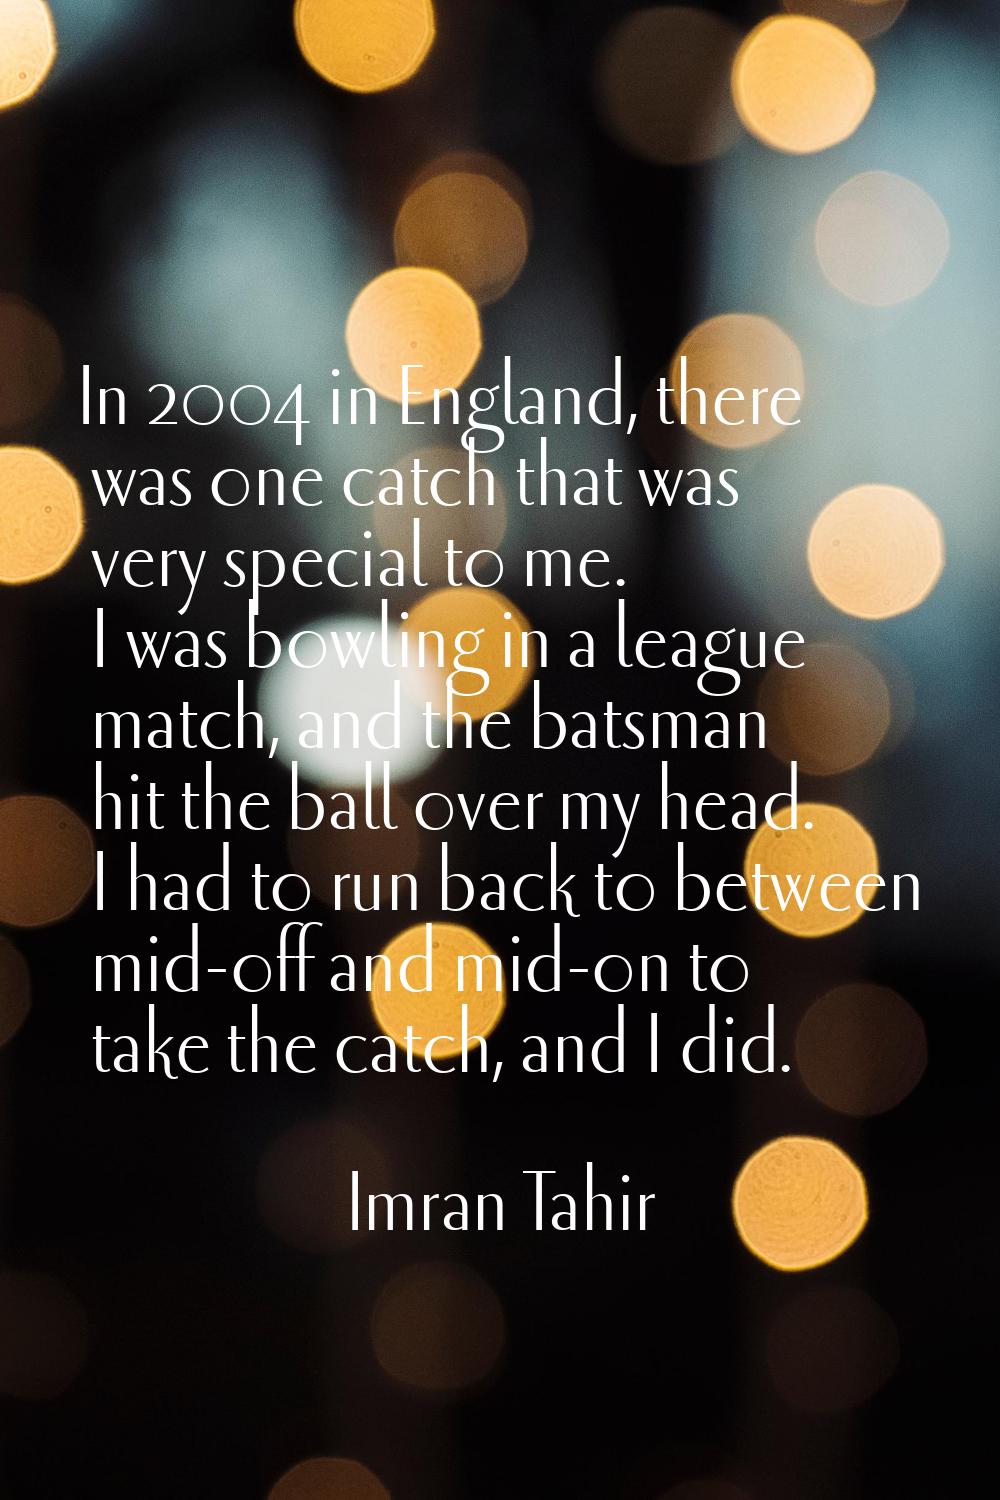 In 2004 in England, there was one catch that was very special to me. I was bowling in a league matc